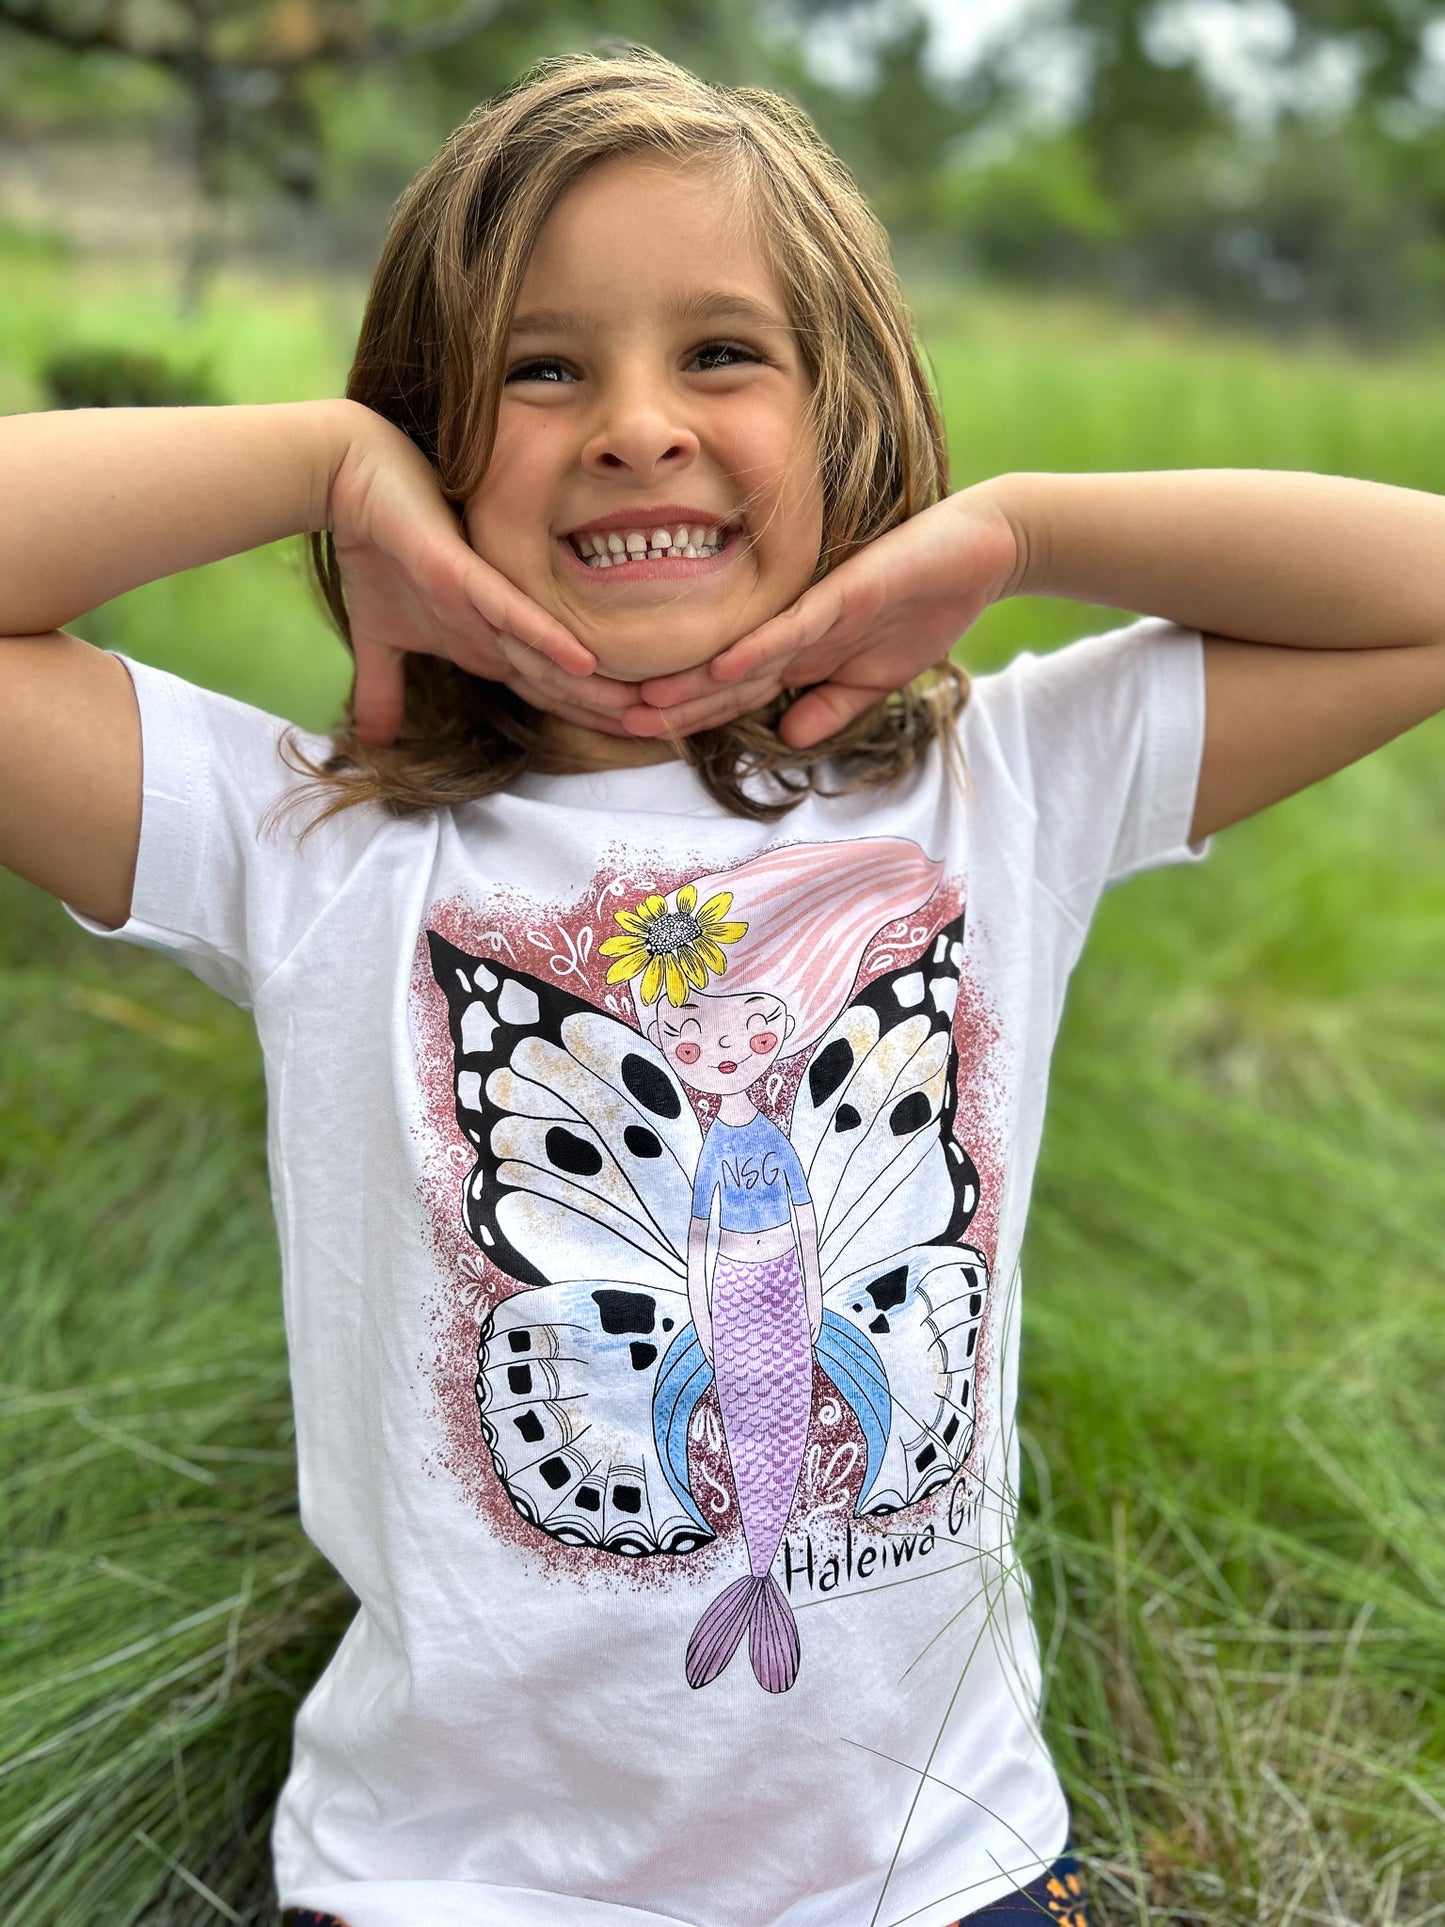 North Shore Girls Tee Collection for kids. Handmade in California Mermaid Haleiwa town mermaid butterfly. A perfect gift for the mermaid lover in your life.